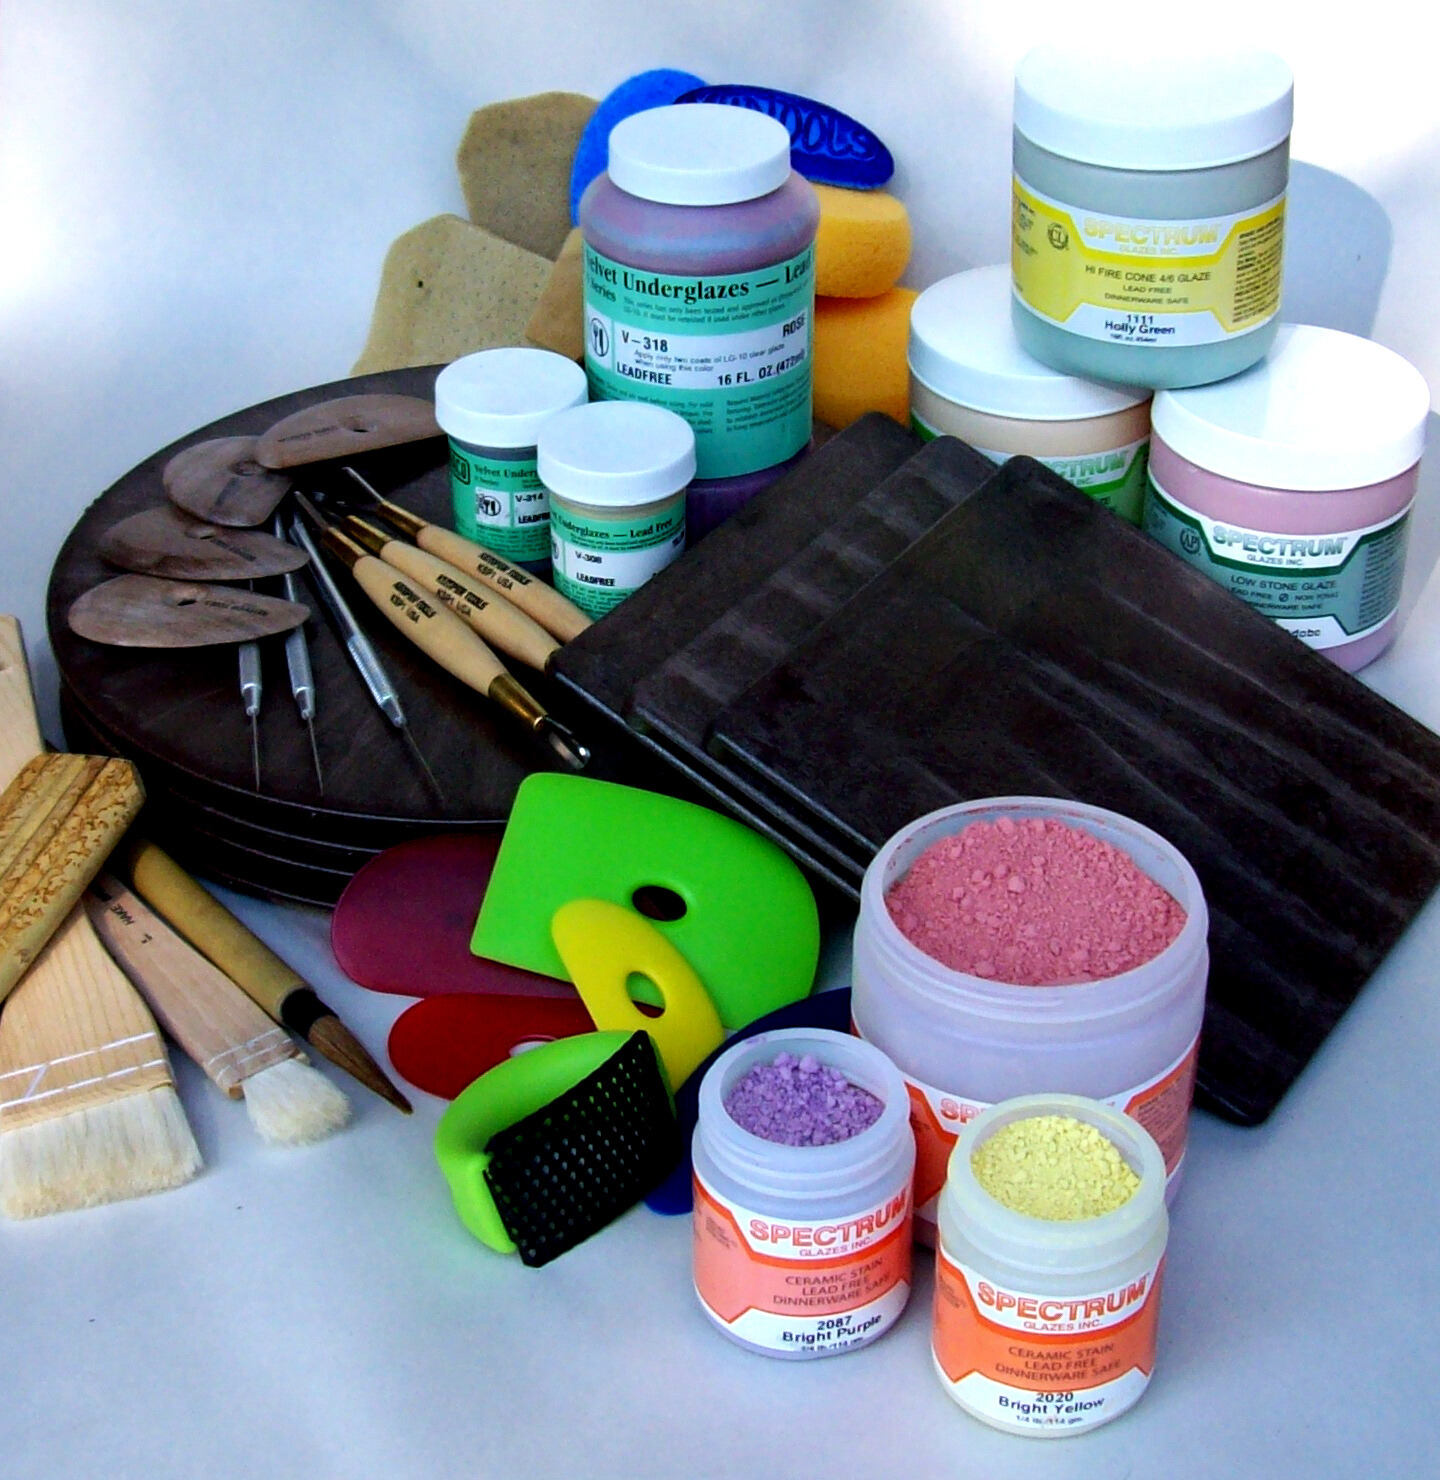 Pottery supplies on a table, including sculpting tools, brushes, and glazes.